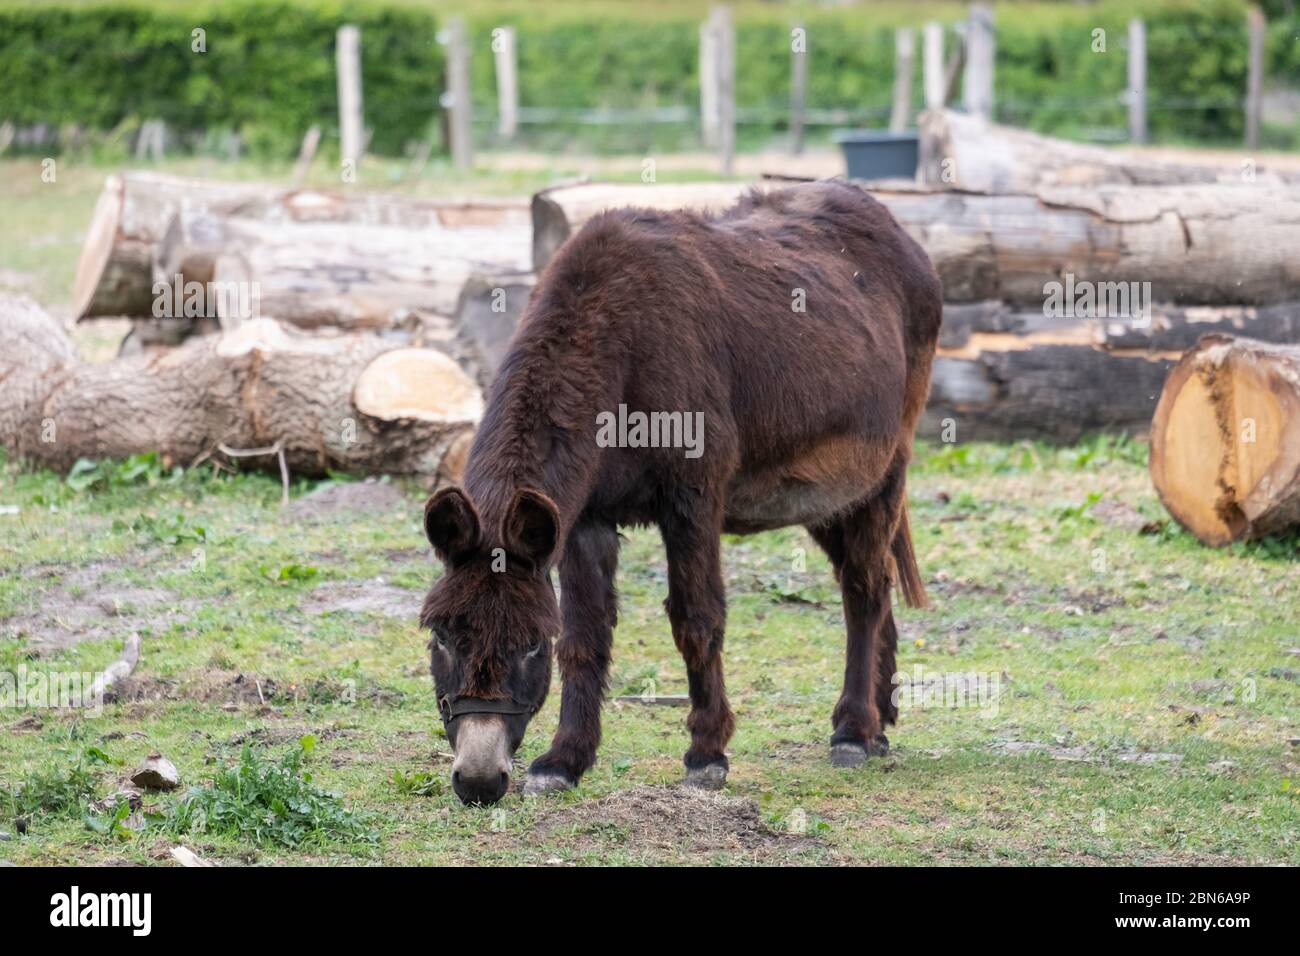 Donkey farm animal brown colour, eating grass, cute funny pets, tree trunks  in the background Stock Photo - Alamy